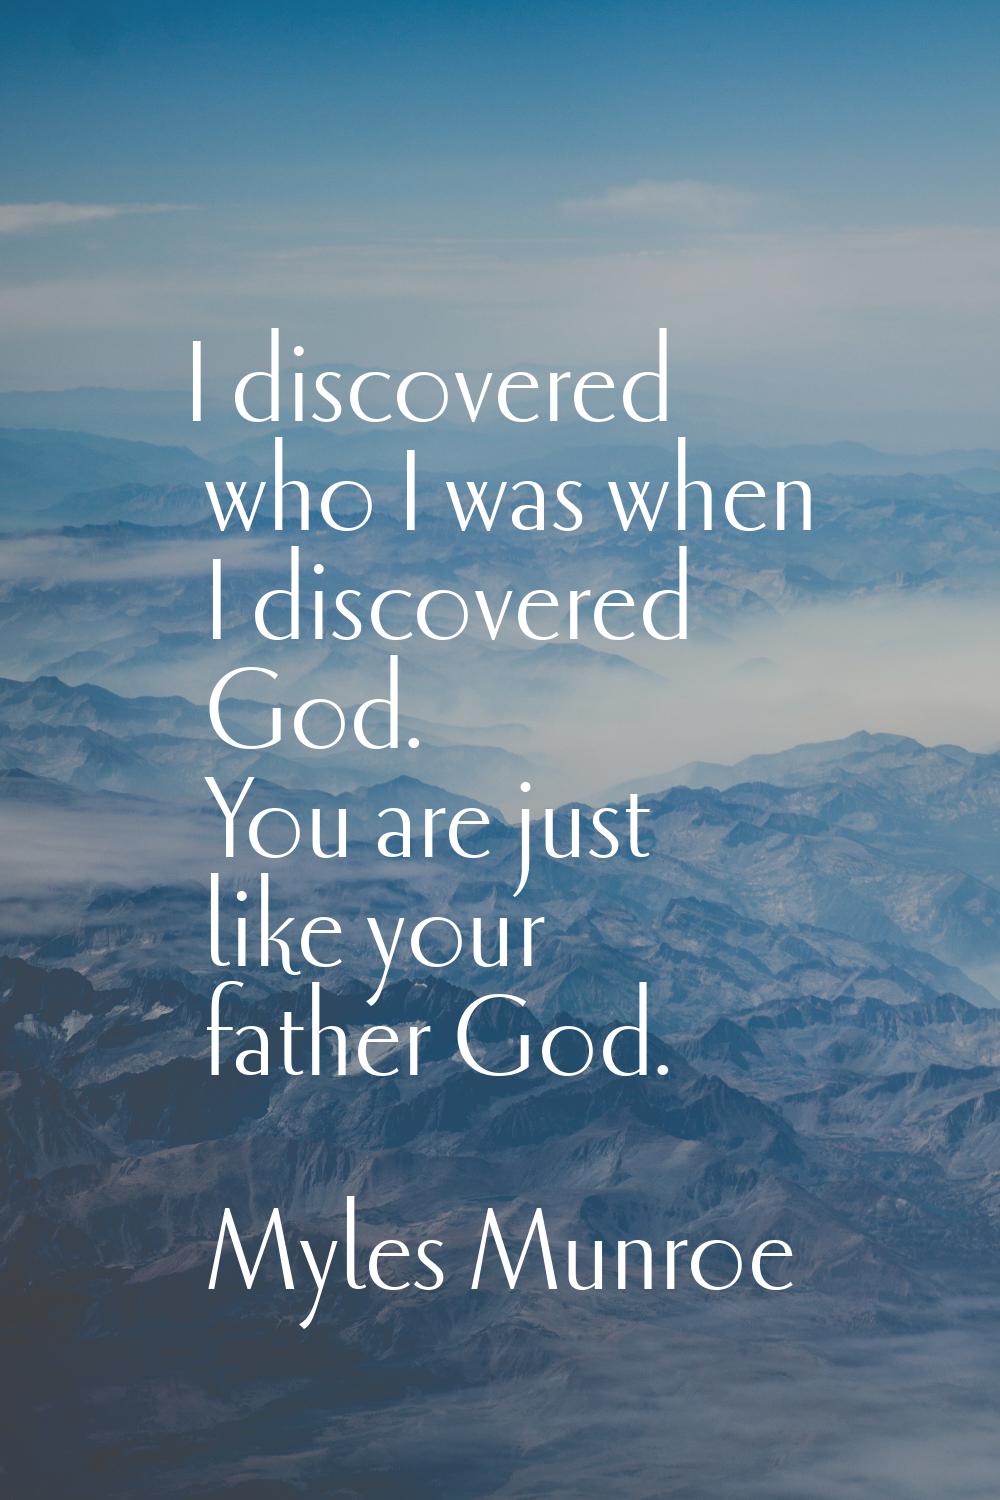 I discovered who I was when I discovered God. You are just like your father God.